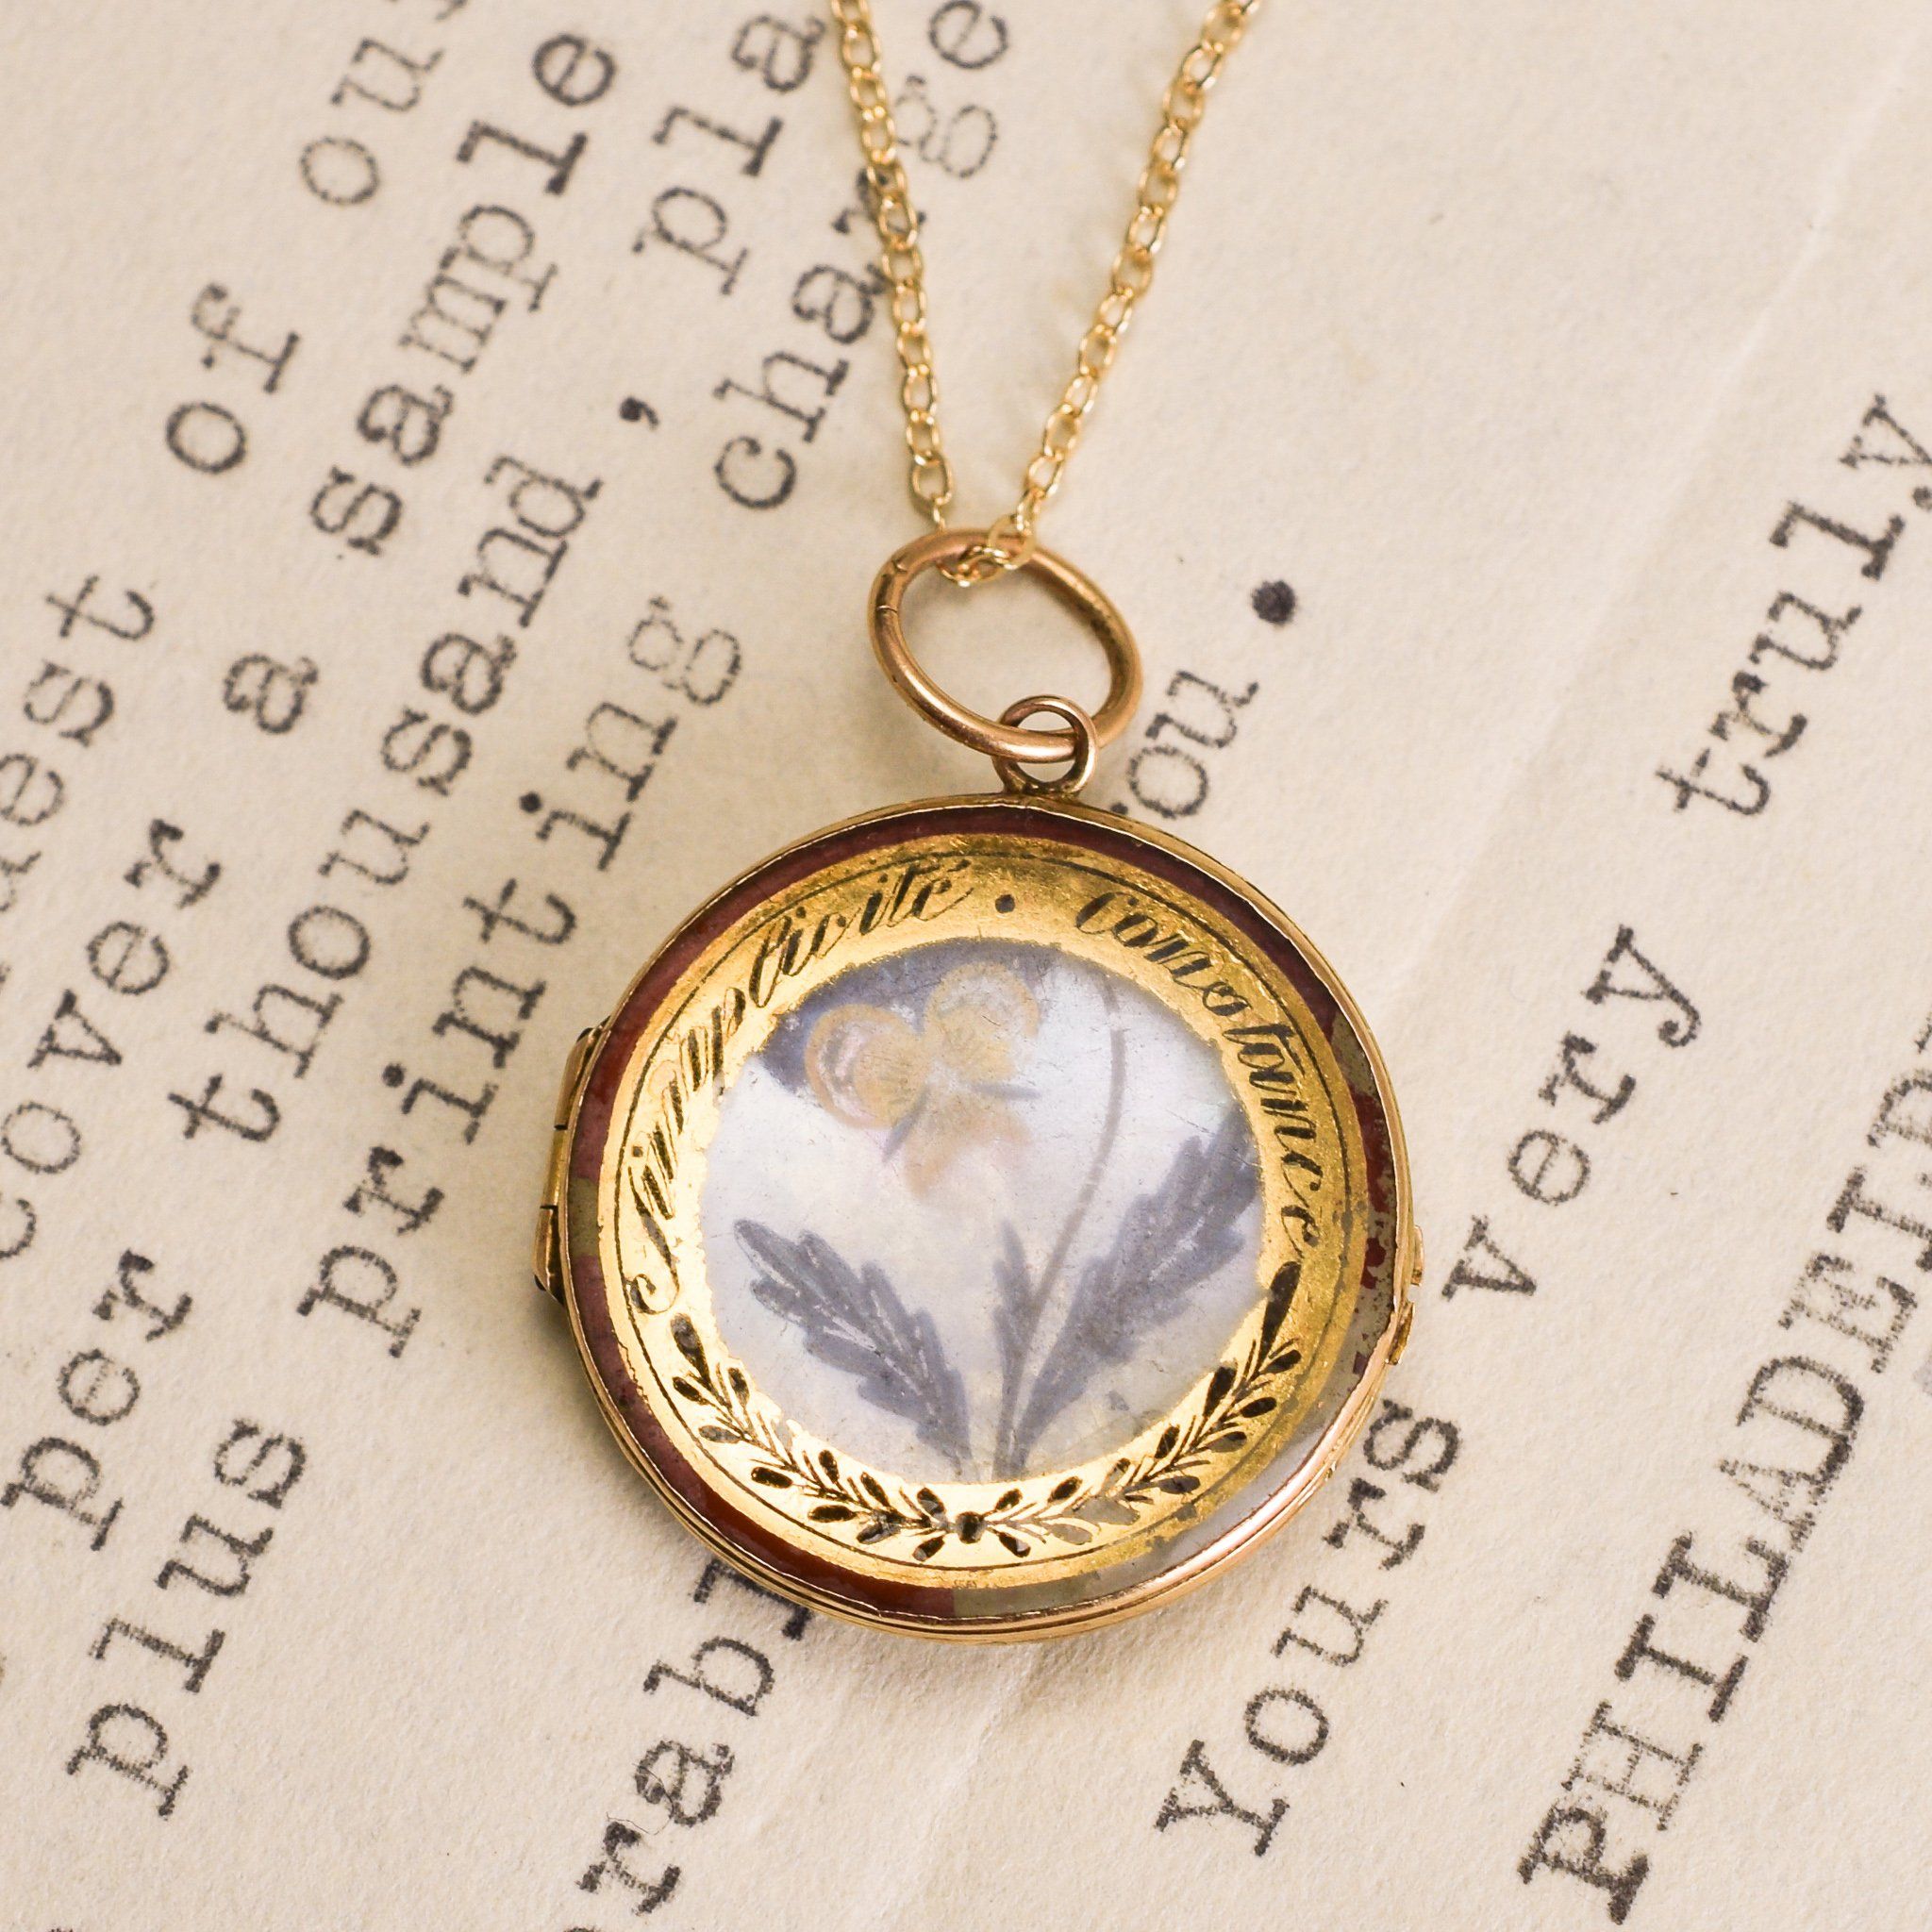 Detail of Early 19th Century "Simplicité Constance" Pansy Locket